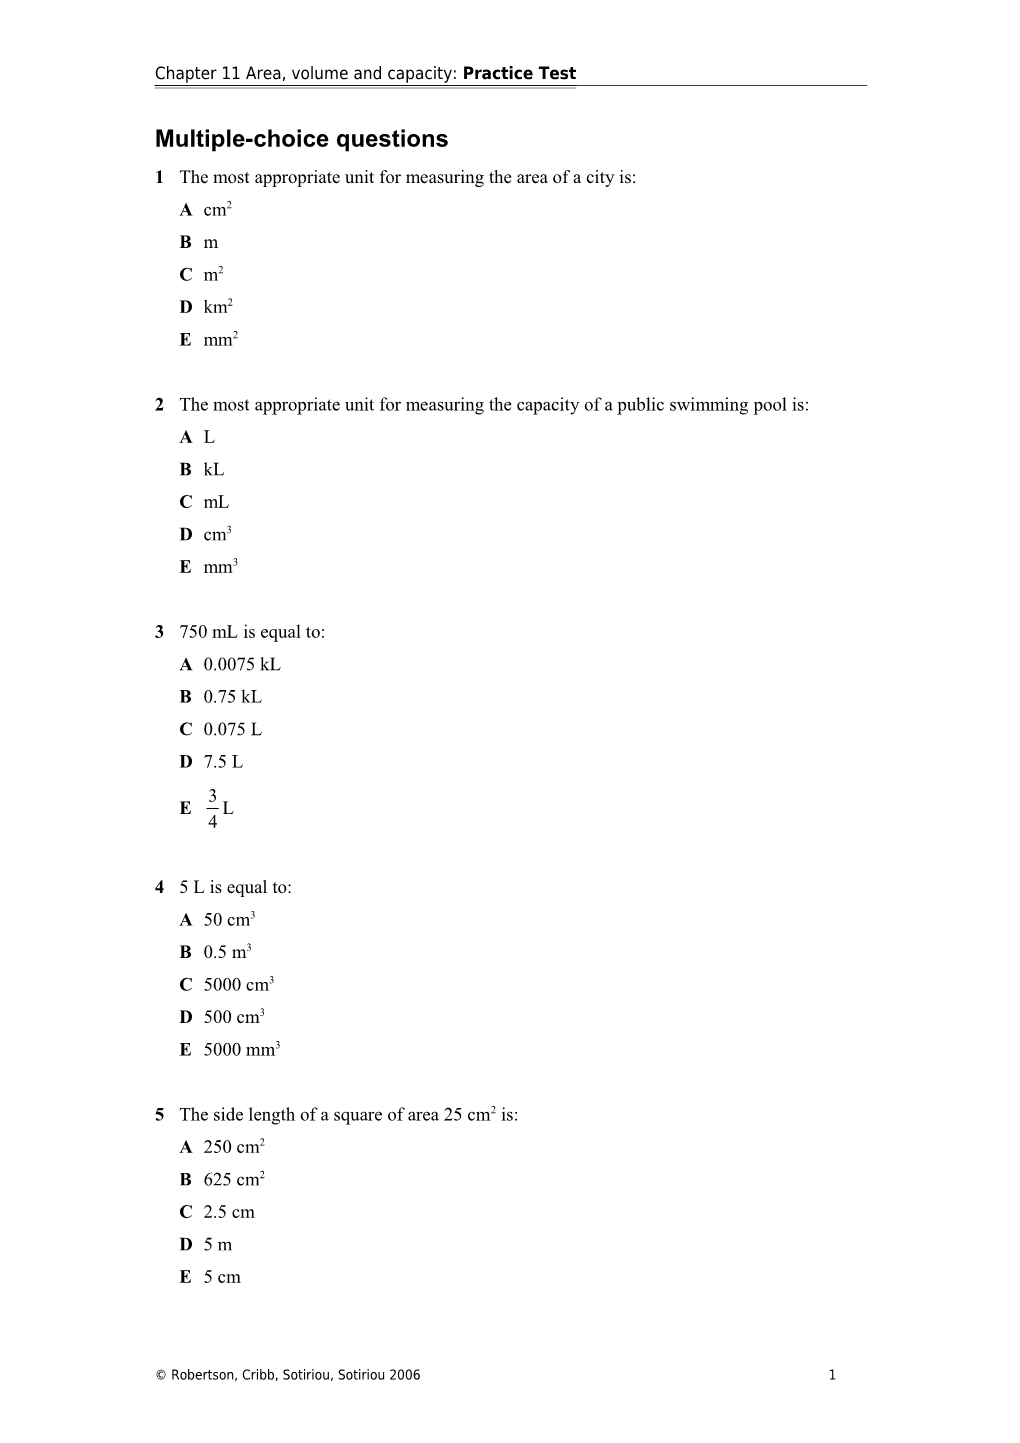 Chapter 11Area, Volume and Capacity: Practice Test